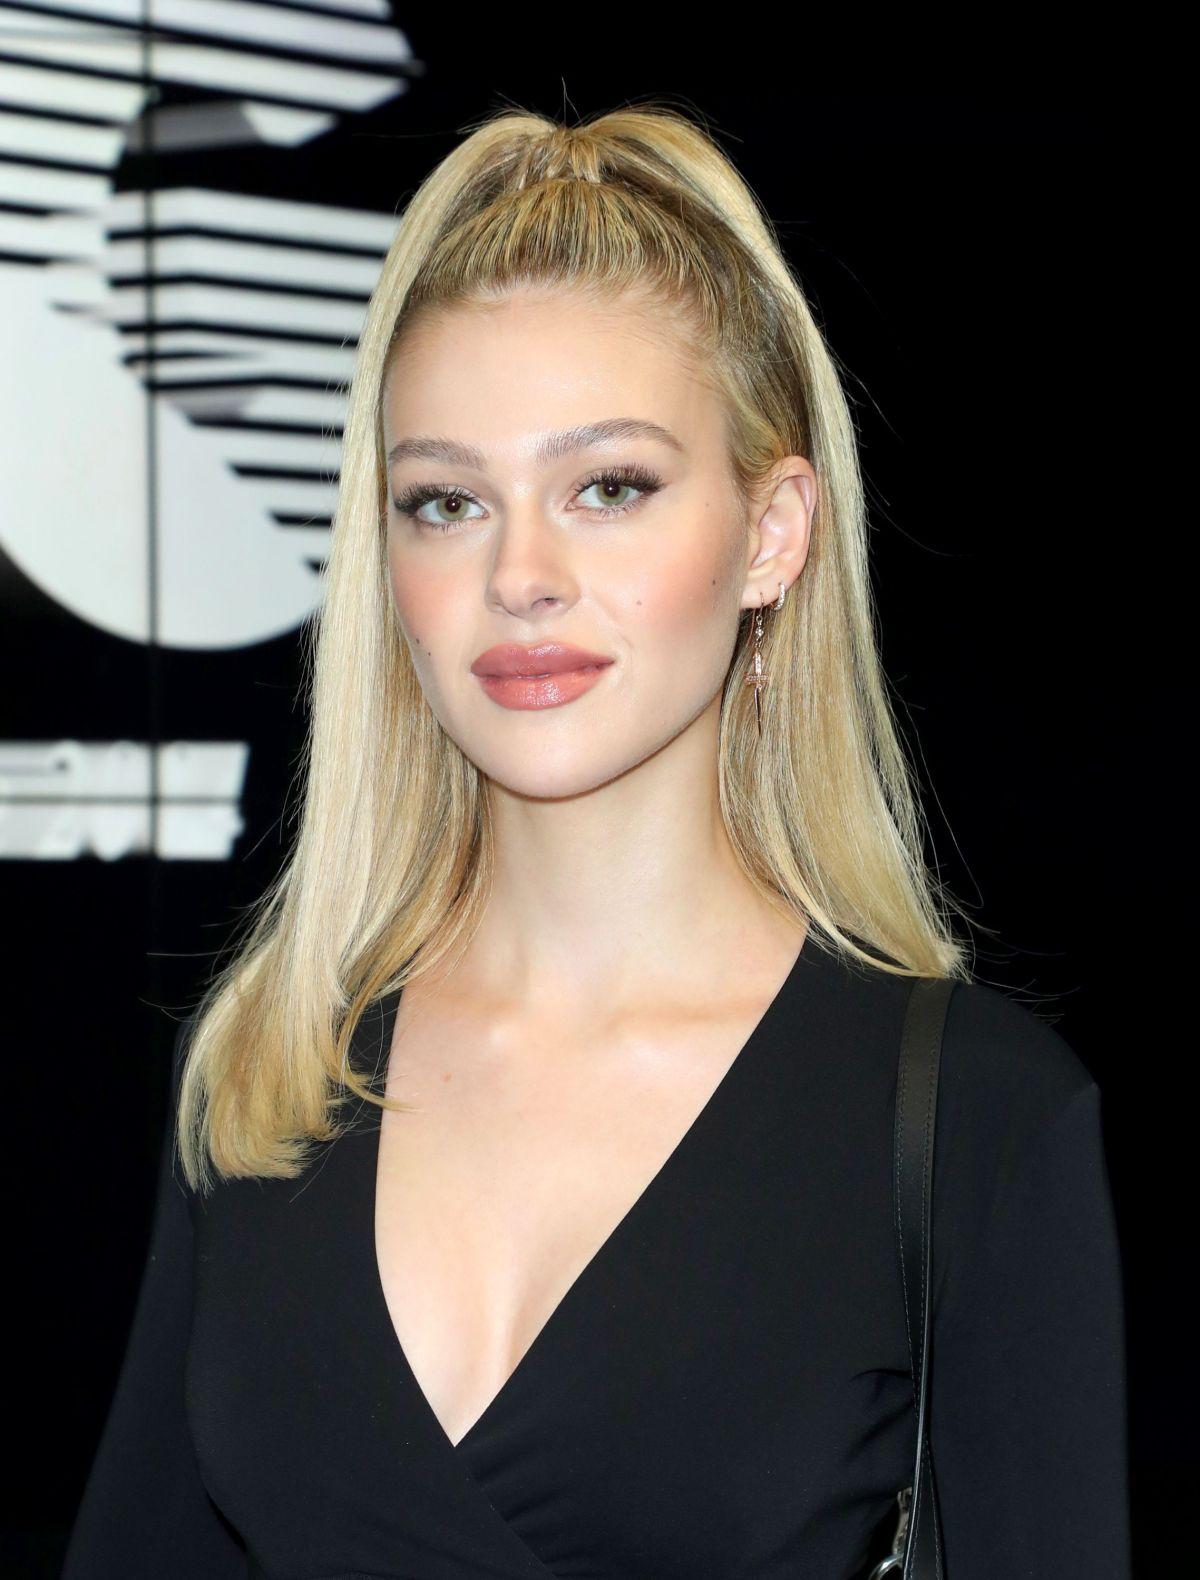 55 Hot Pictures Of Nicola Peltz Will Drive You Insane For Her 239